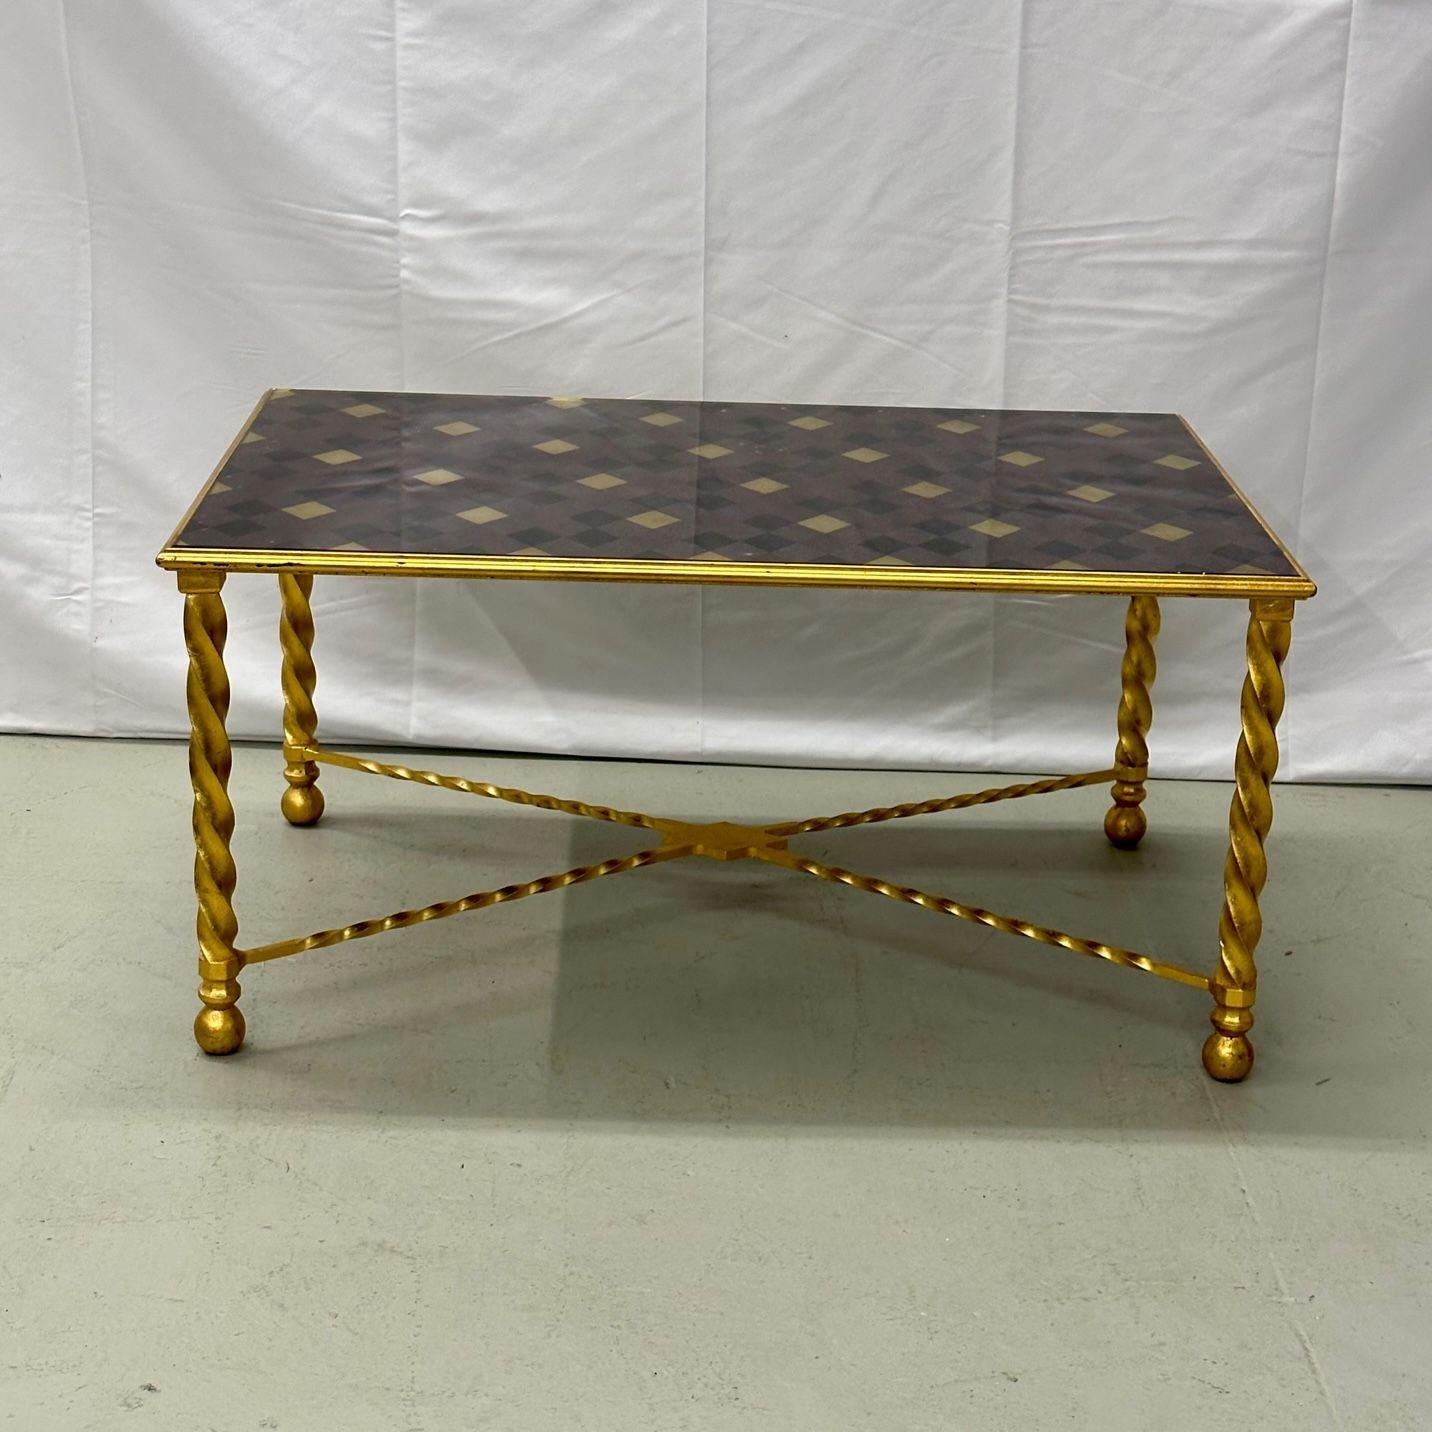 Hollywood Regency gilt metal carved leg rectangular coffee / cocktail table
A fine custom glass table top with reverse painted diamond design on a twist Bagues style table base of gilt metal. 
Measures: 18H x 37W x 23.75D.